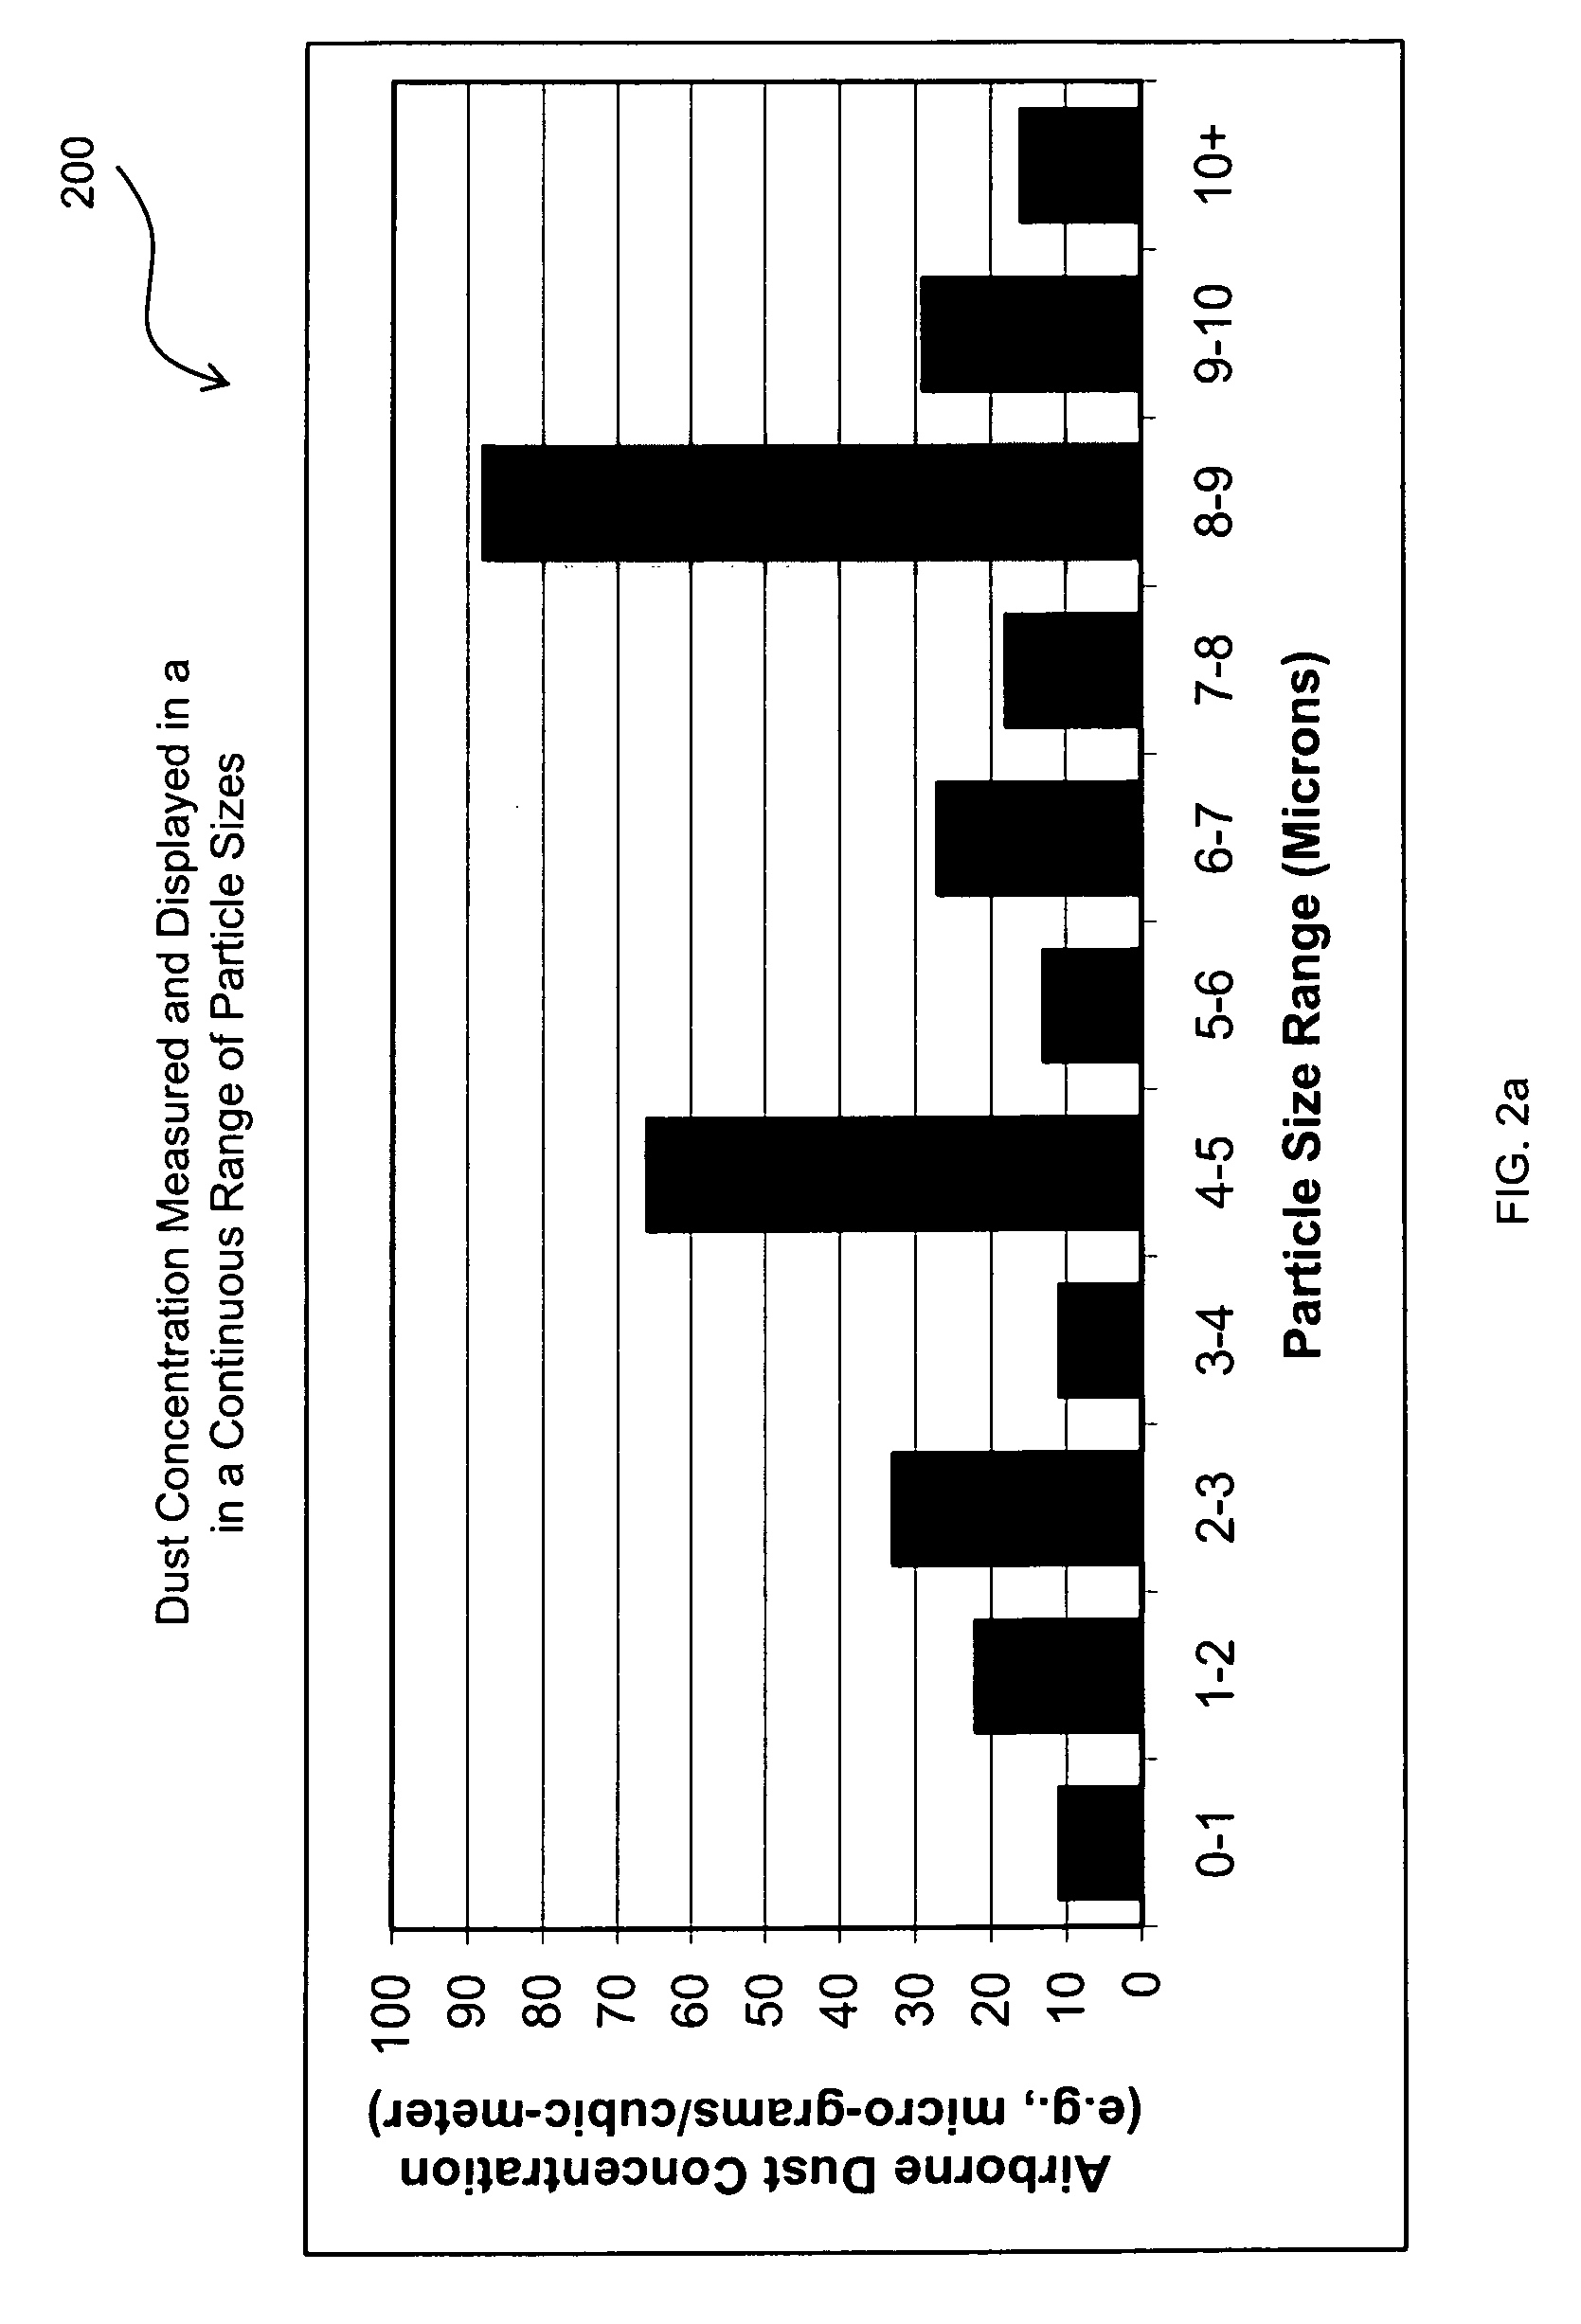 Methods and systems for analysis, reporting and display of environmental data